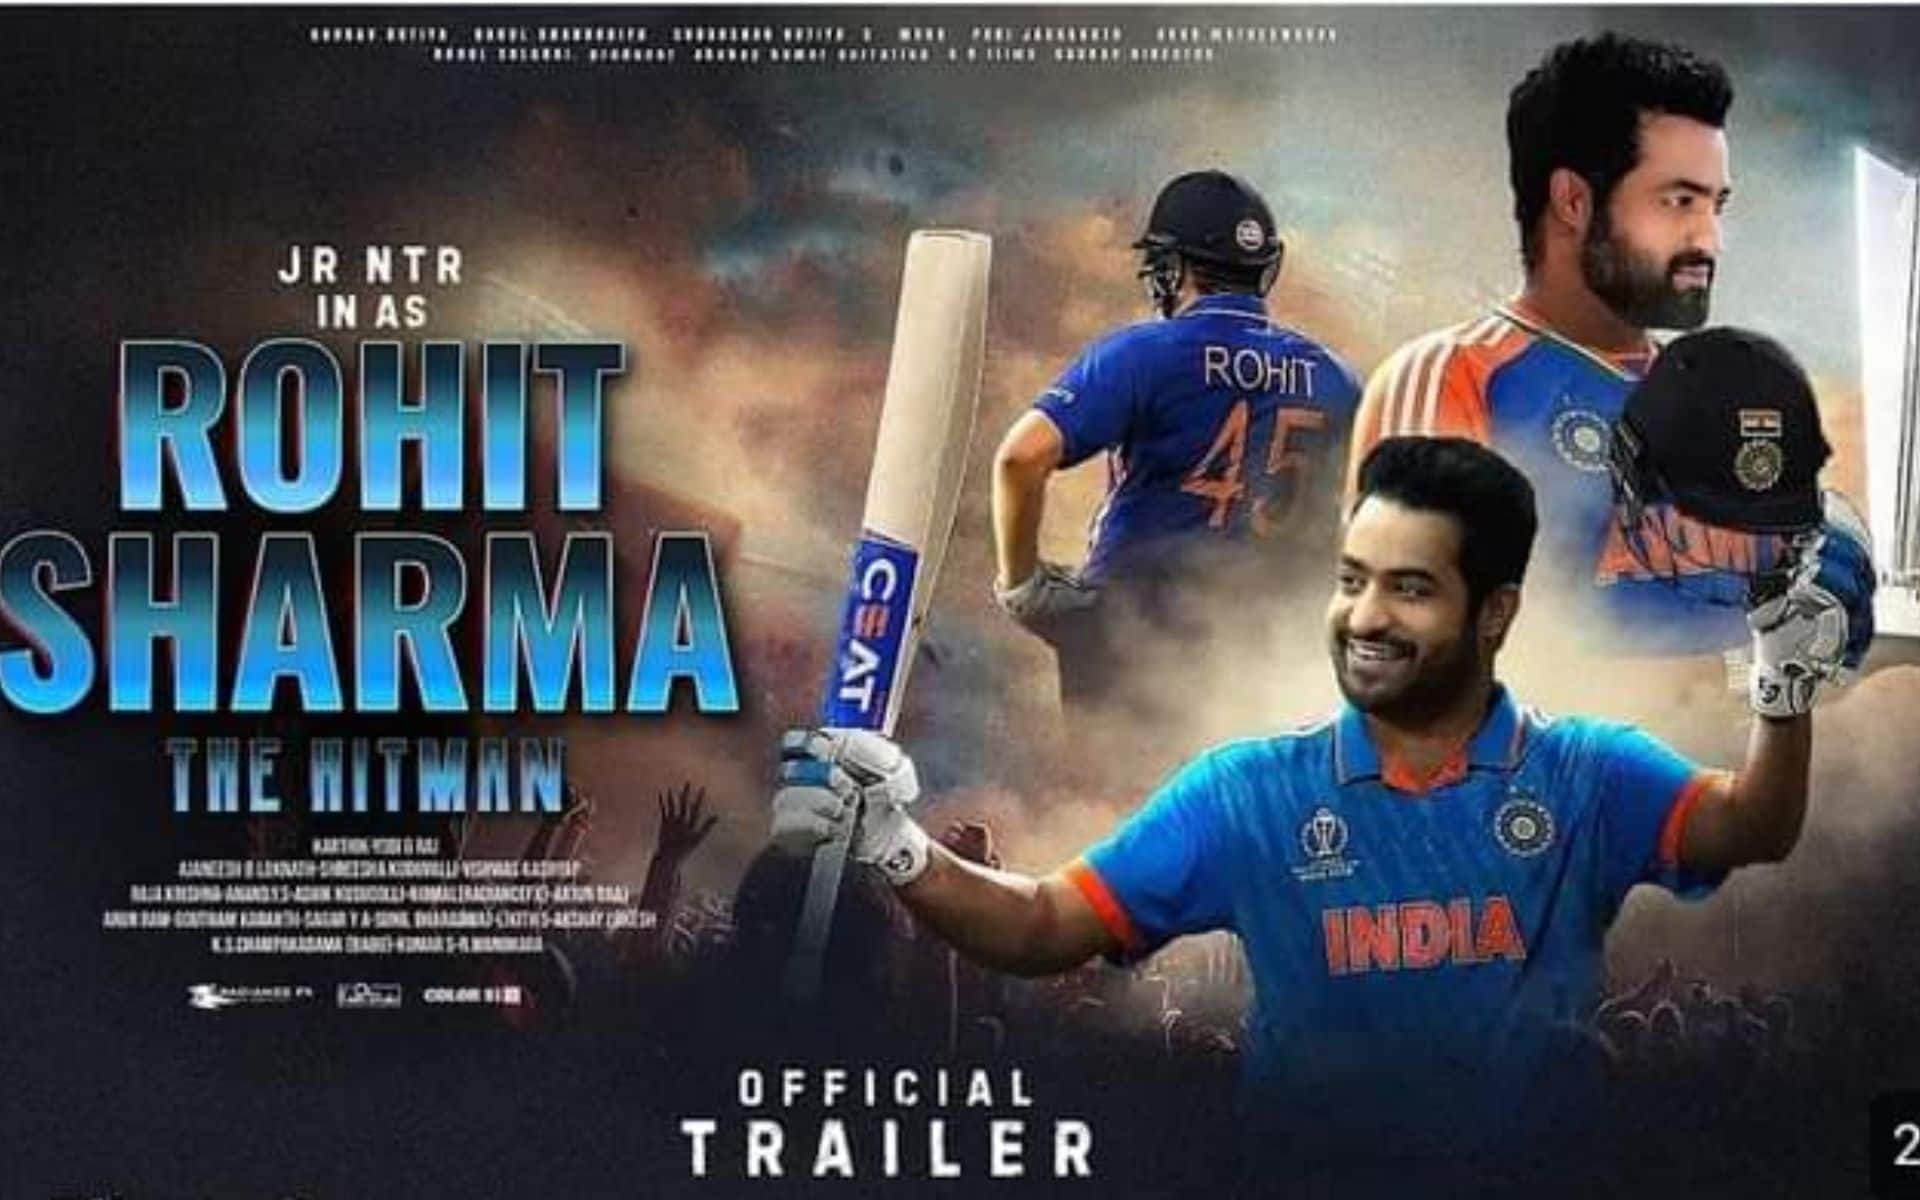 Is Rohit Sharma Biopic Happening? Poster Portraying Jr NTR As Rohit Tells A Story